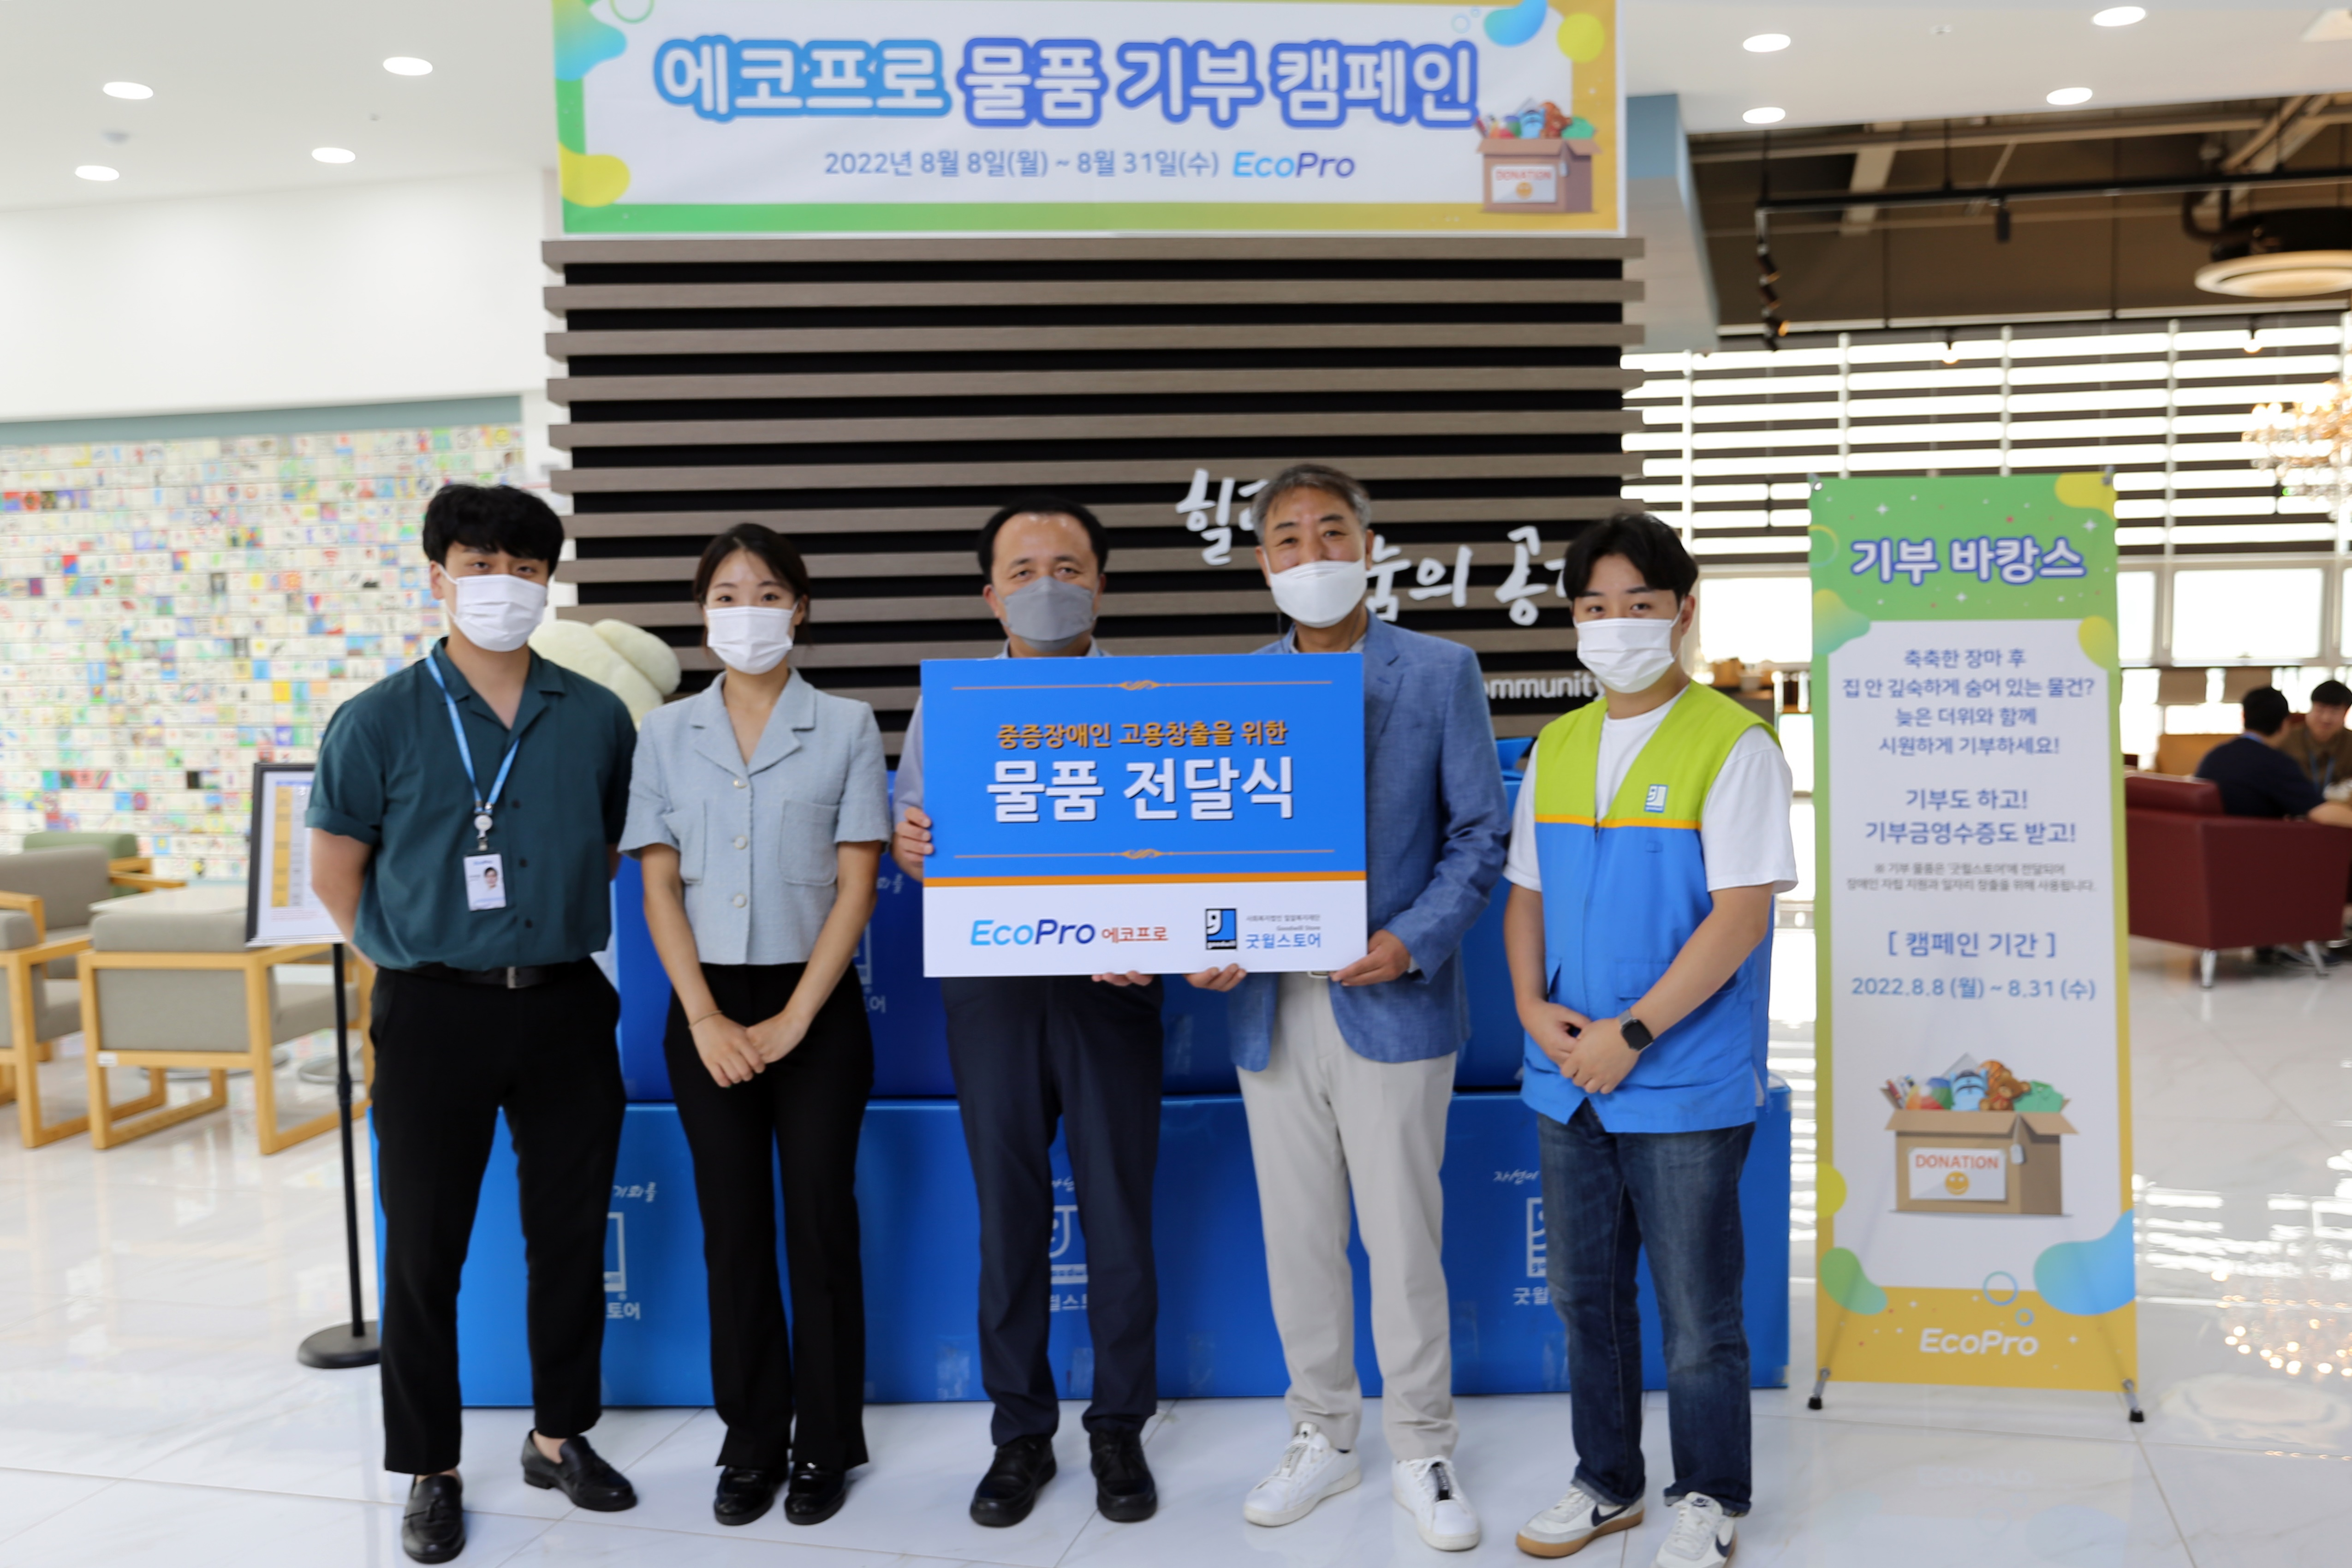 Ecopro, Good Cycling - Goods Donation Campaign (2022.08.31)